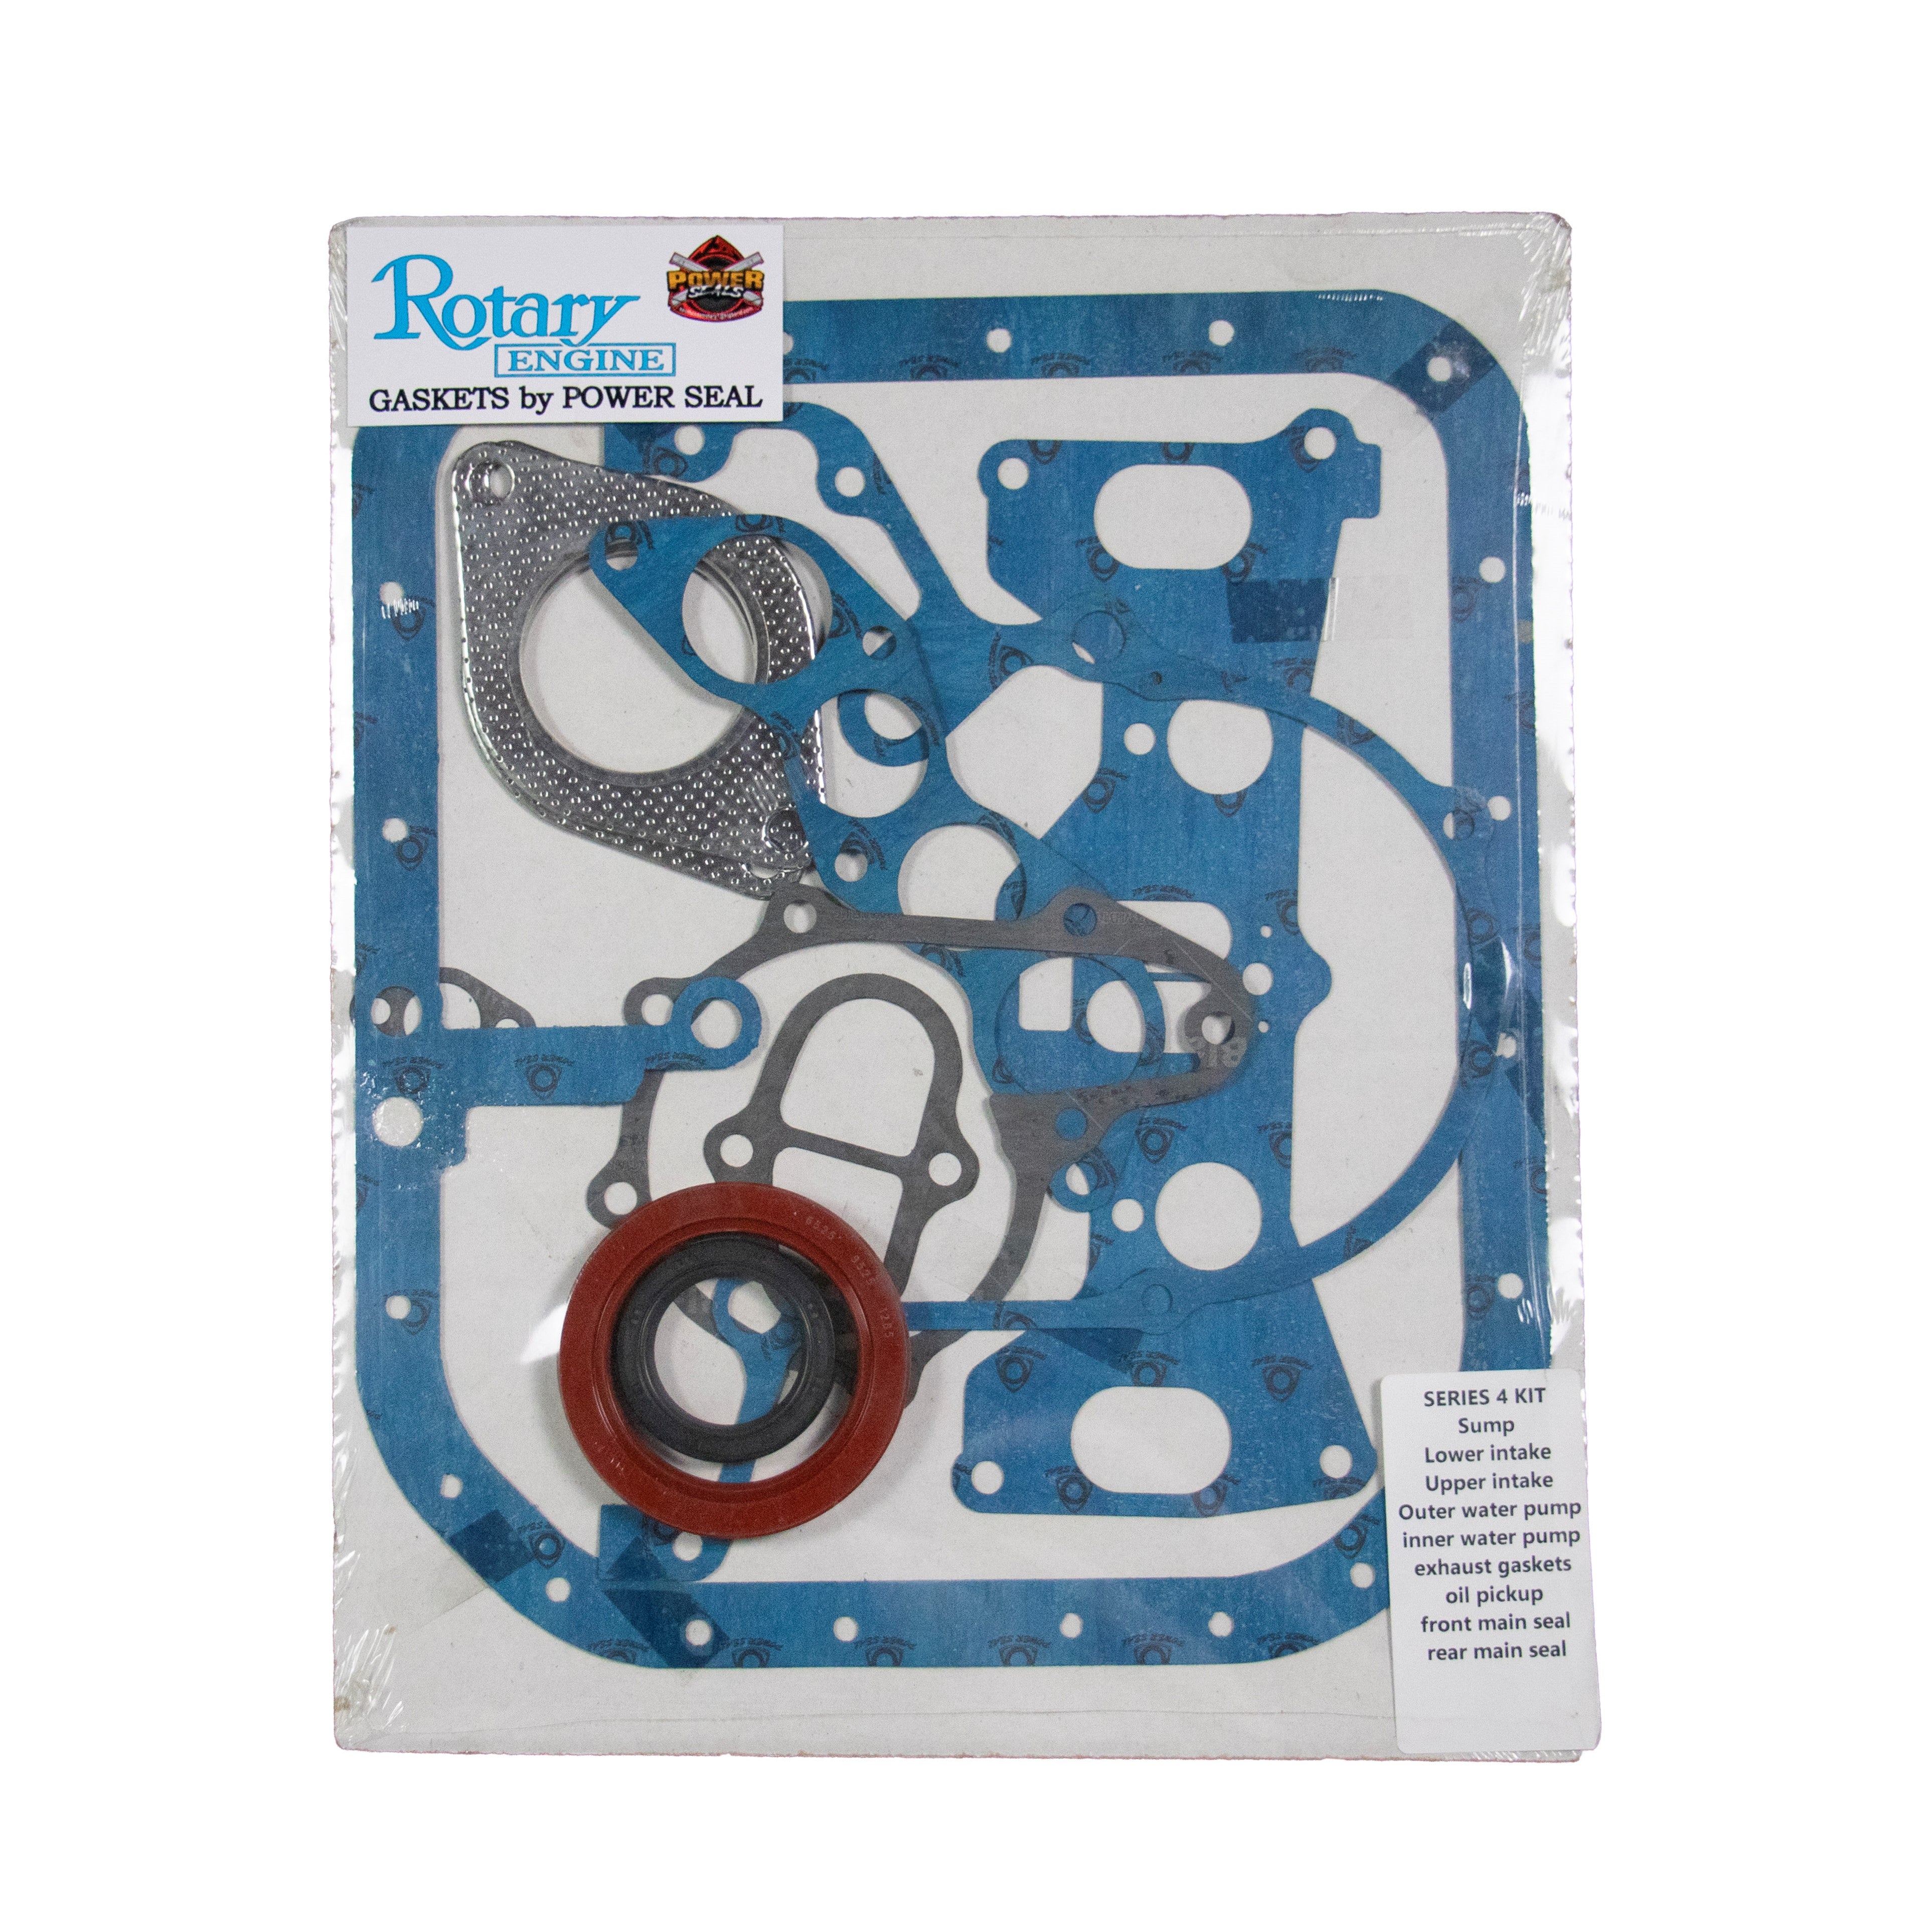 Mazda Rx7 FC3S Series 4/5 Complete Gasket Set with Front & Rear Main Seal Kit